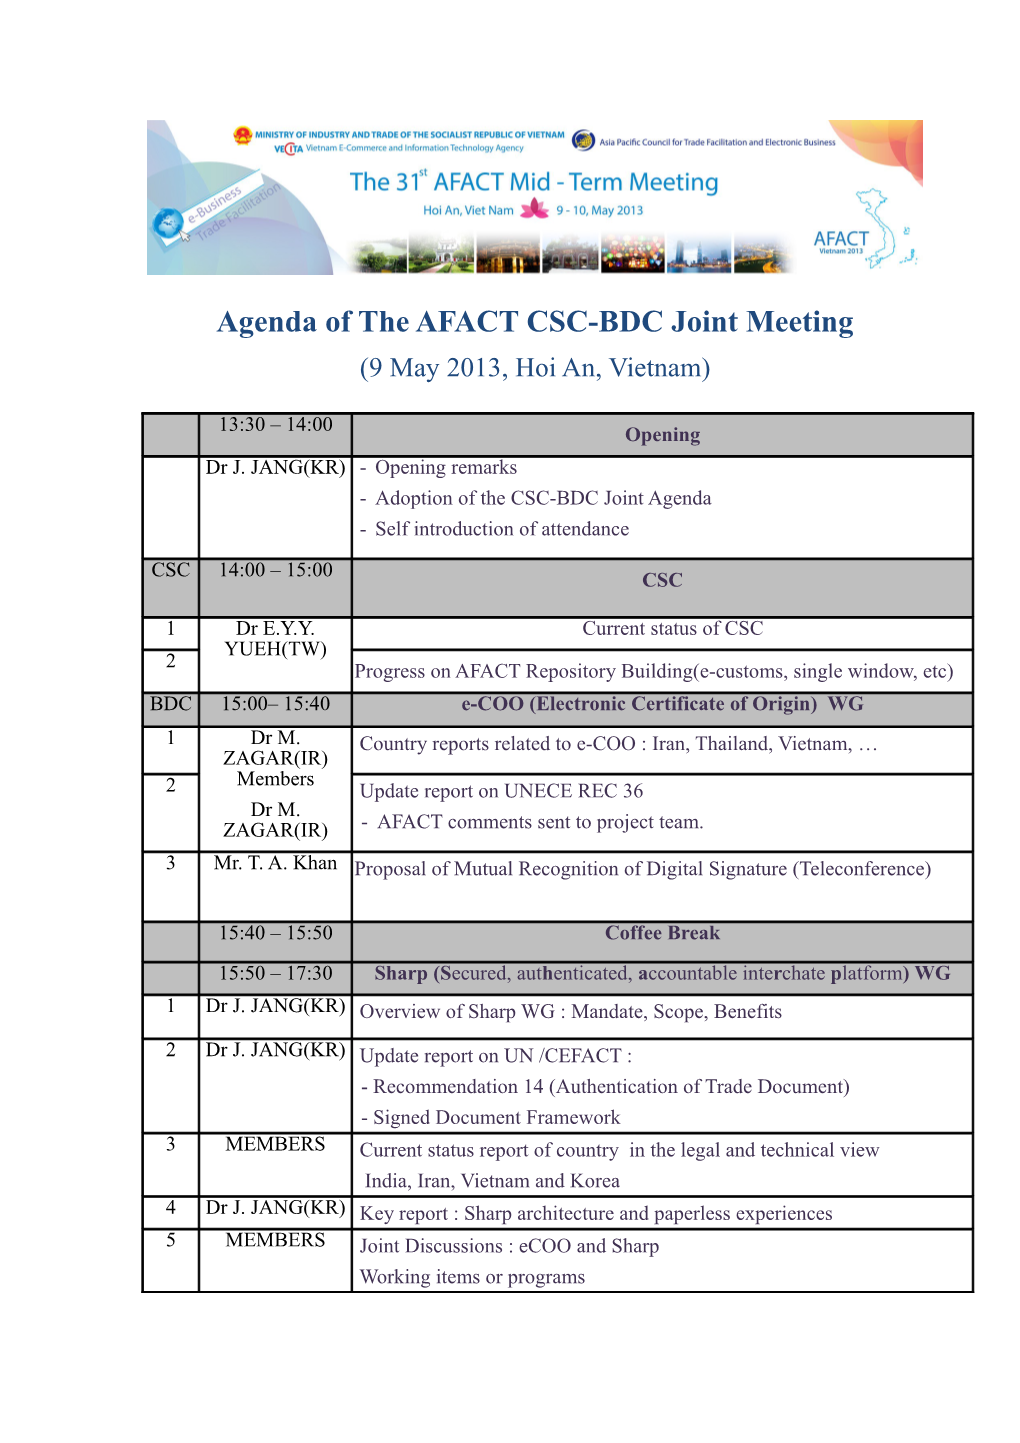 Agenda of the AFACT CSC-BDC Joint Meeting